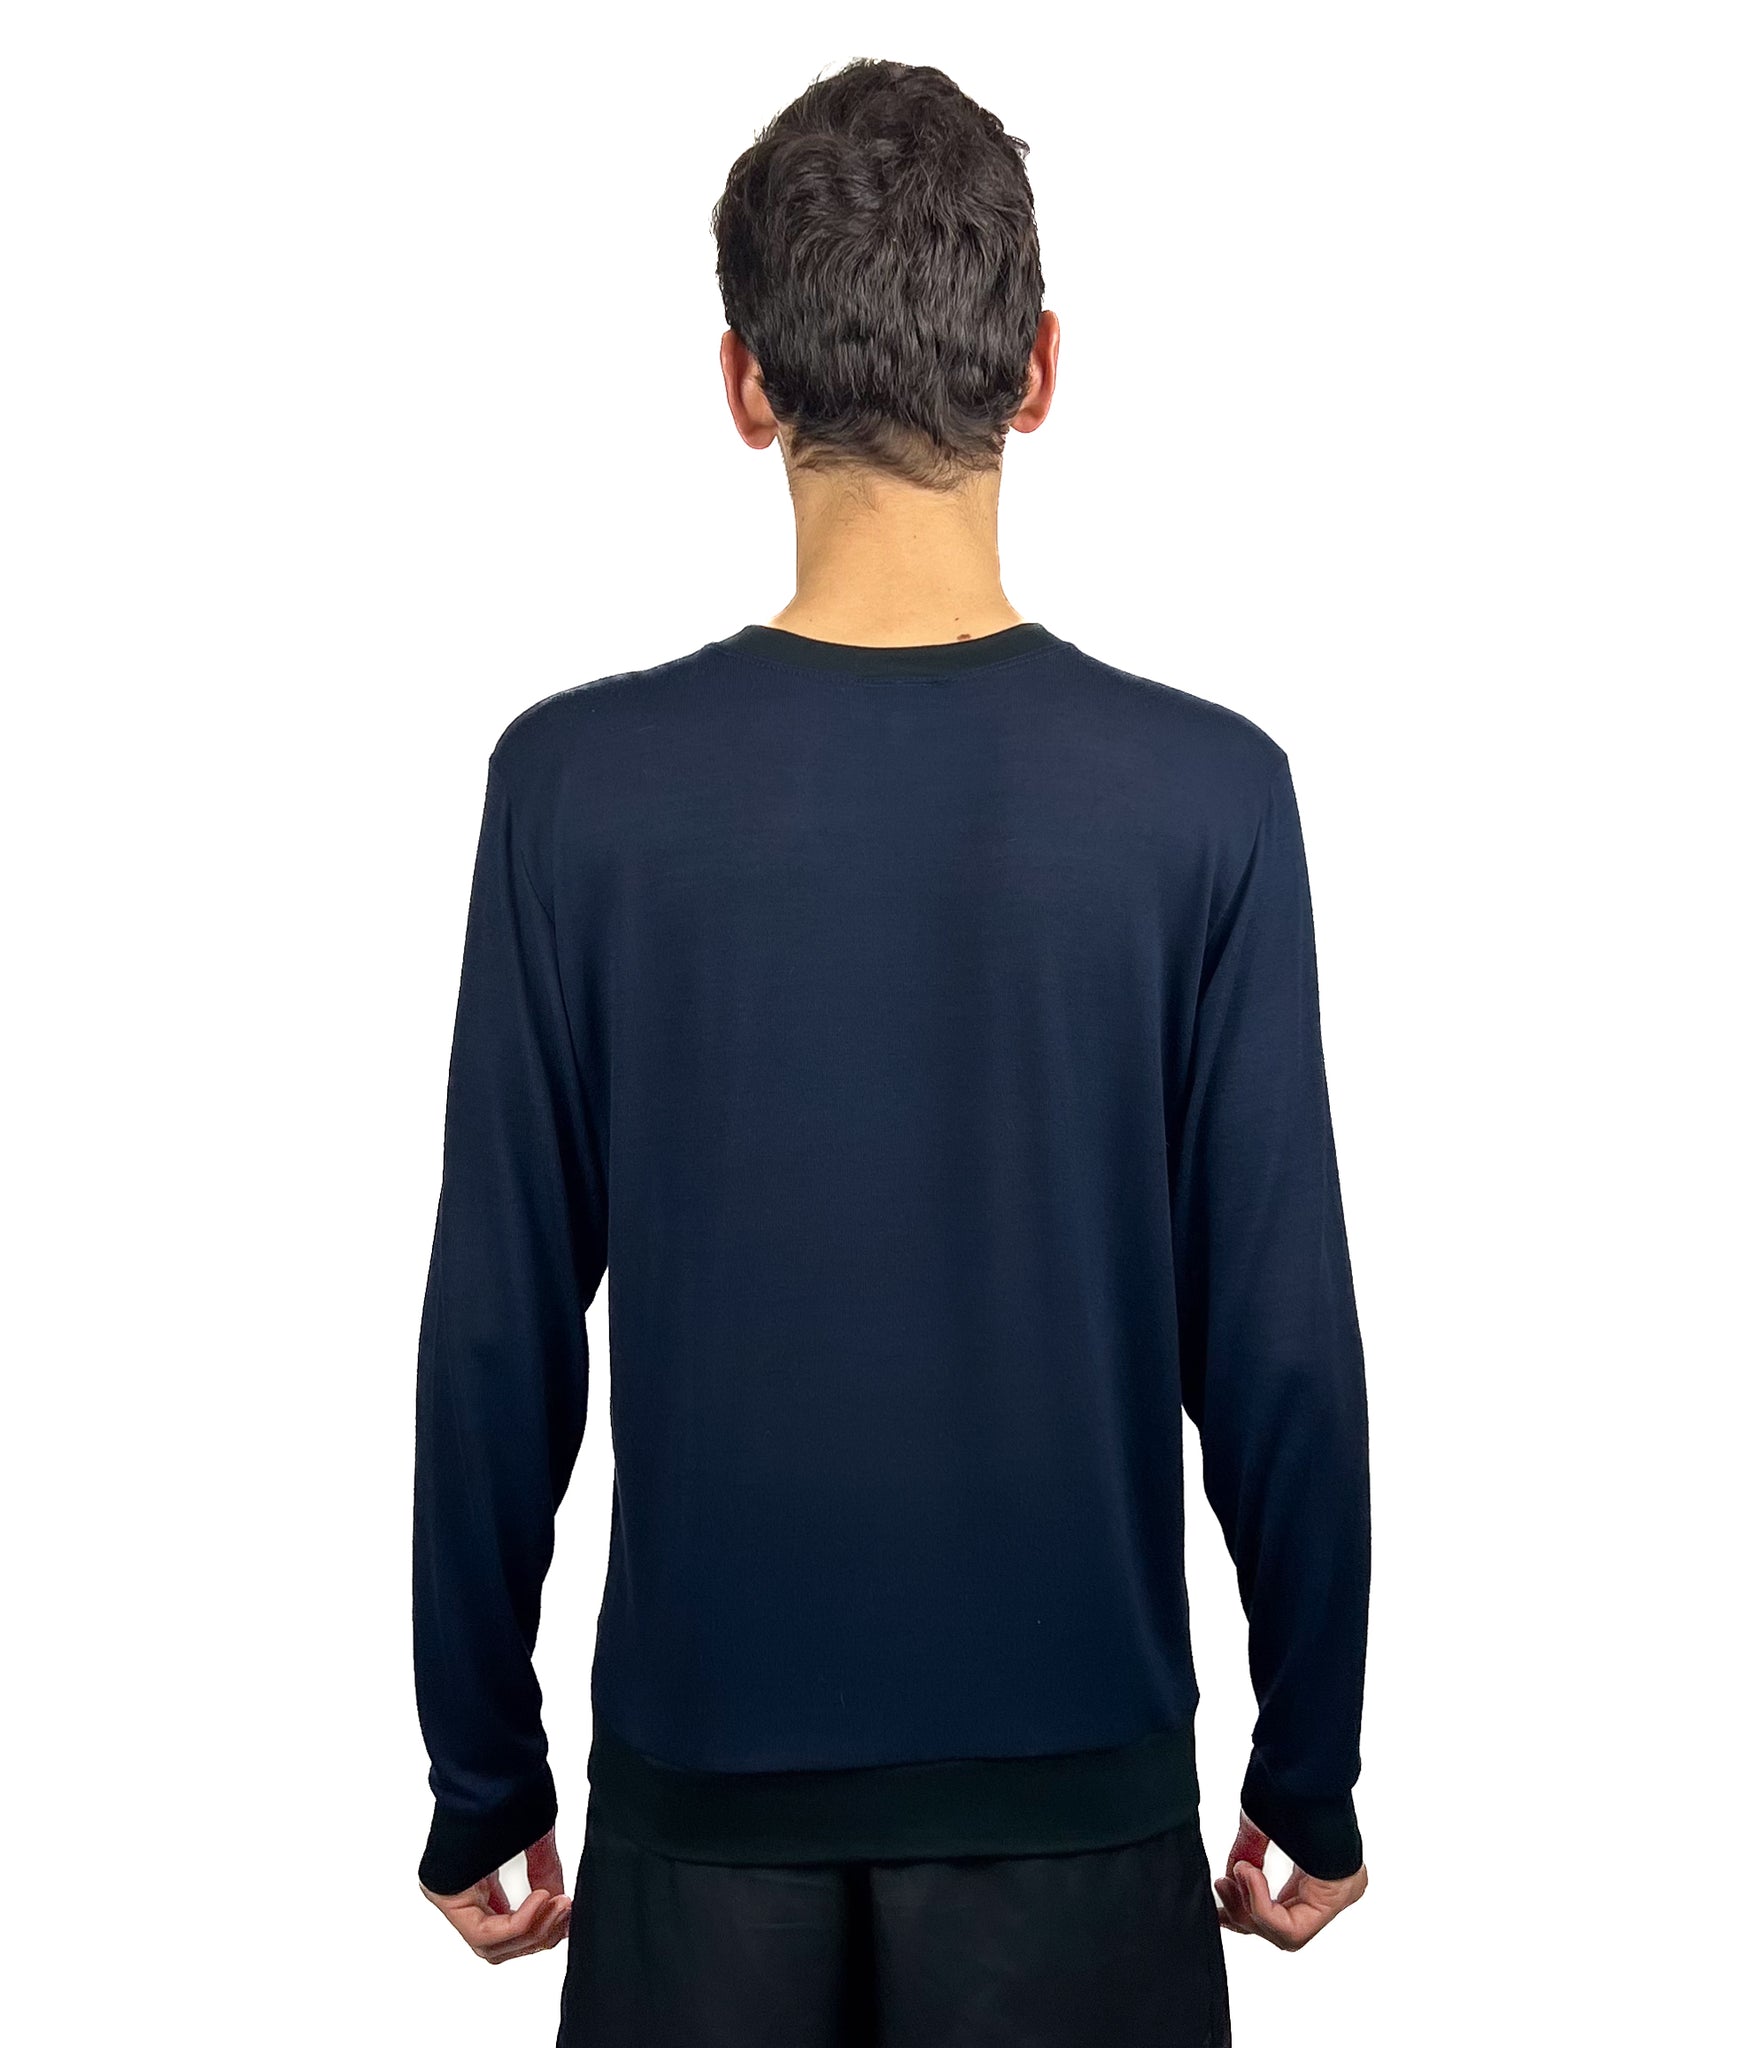 "The Everywhere" Super Soft Sweater, Navy